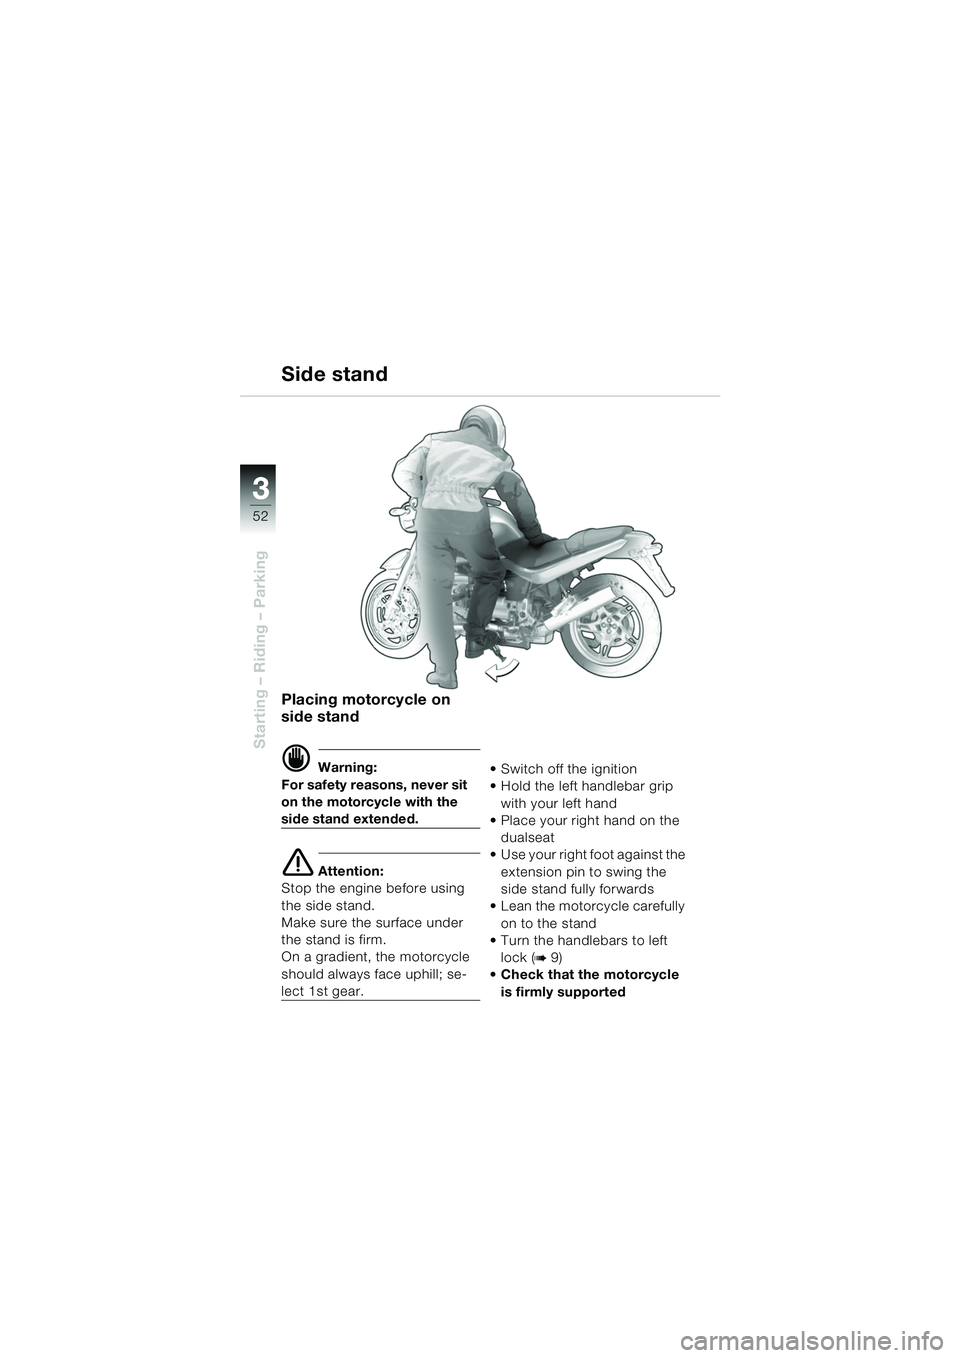 BMW MOTORRAD R 1150 R 2004  Riders Manual (in English) 33
52
Starting – Riding – Parking
Placing motorcycle on 
side stand
d Warning:
For safety reasons, never sit 
on the motorcycle with the 
side stand extended.
e Attention:
Stop the engine before u